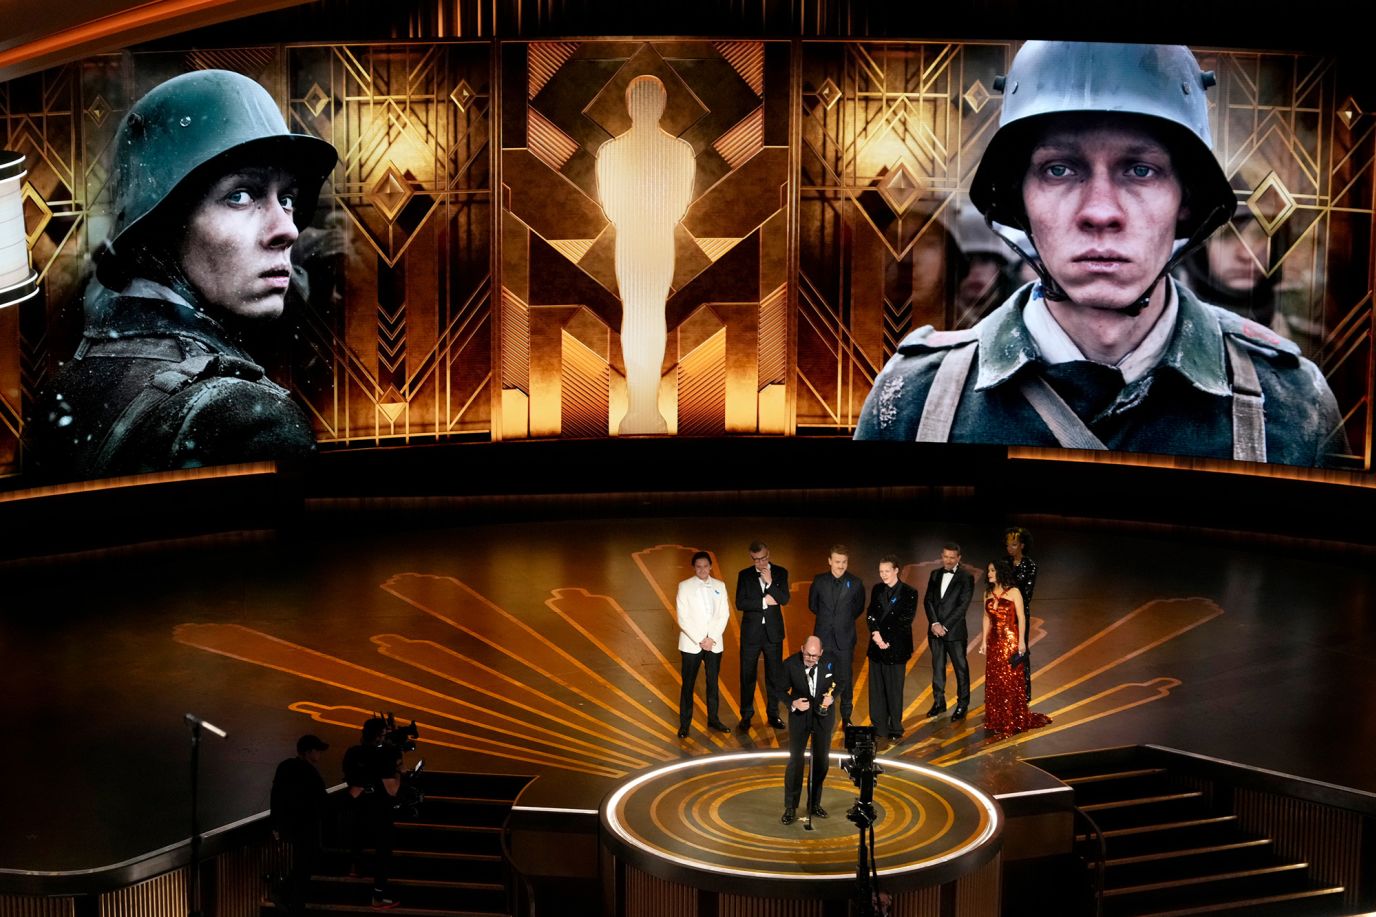 "All Quiet on the Western Front" director Edward Berger accepts the Oscar for best international feature film.